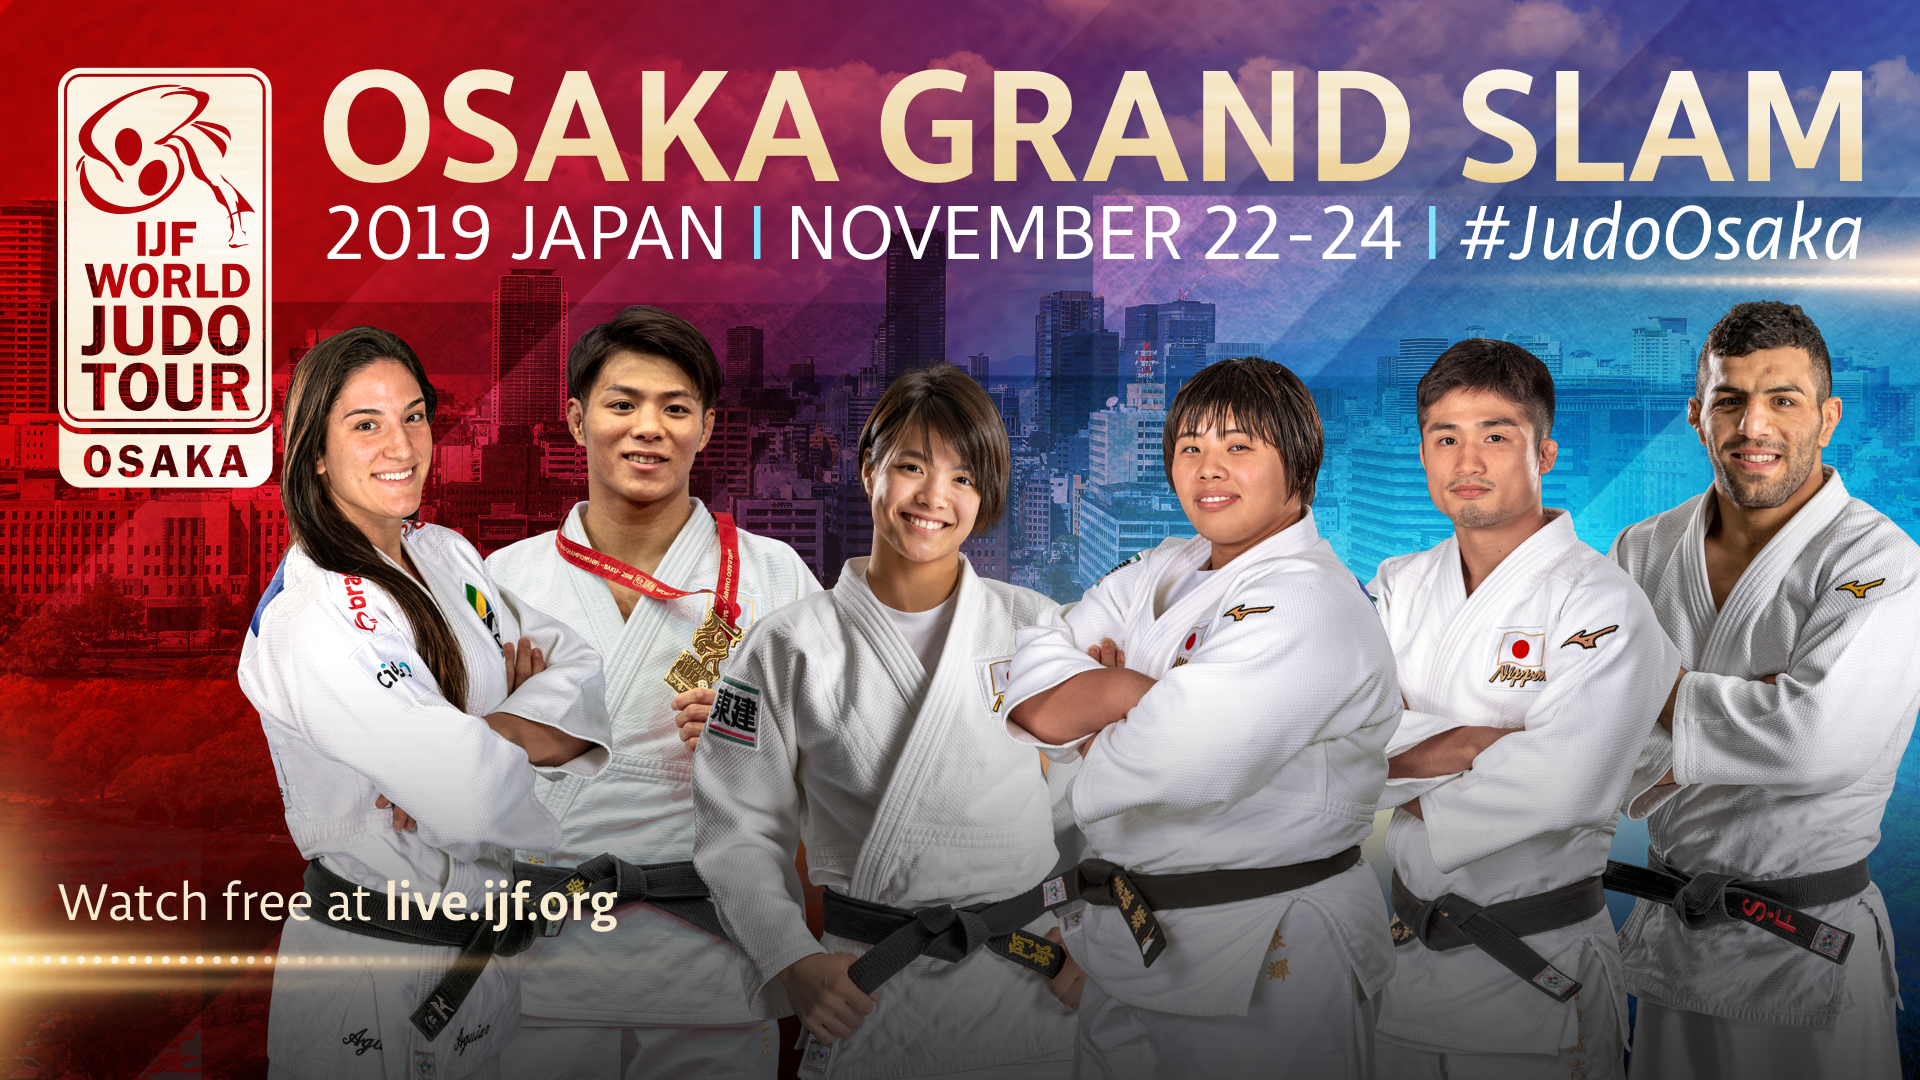 Things to Get Excited About At #JudoOsaka / IJF.org